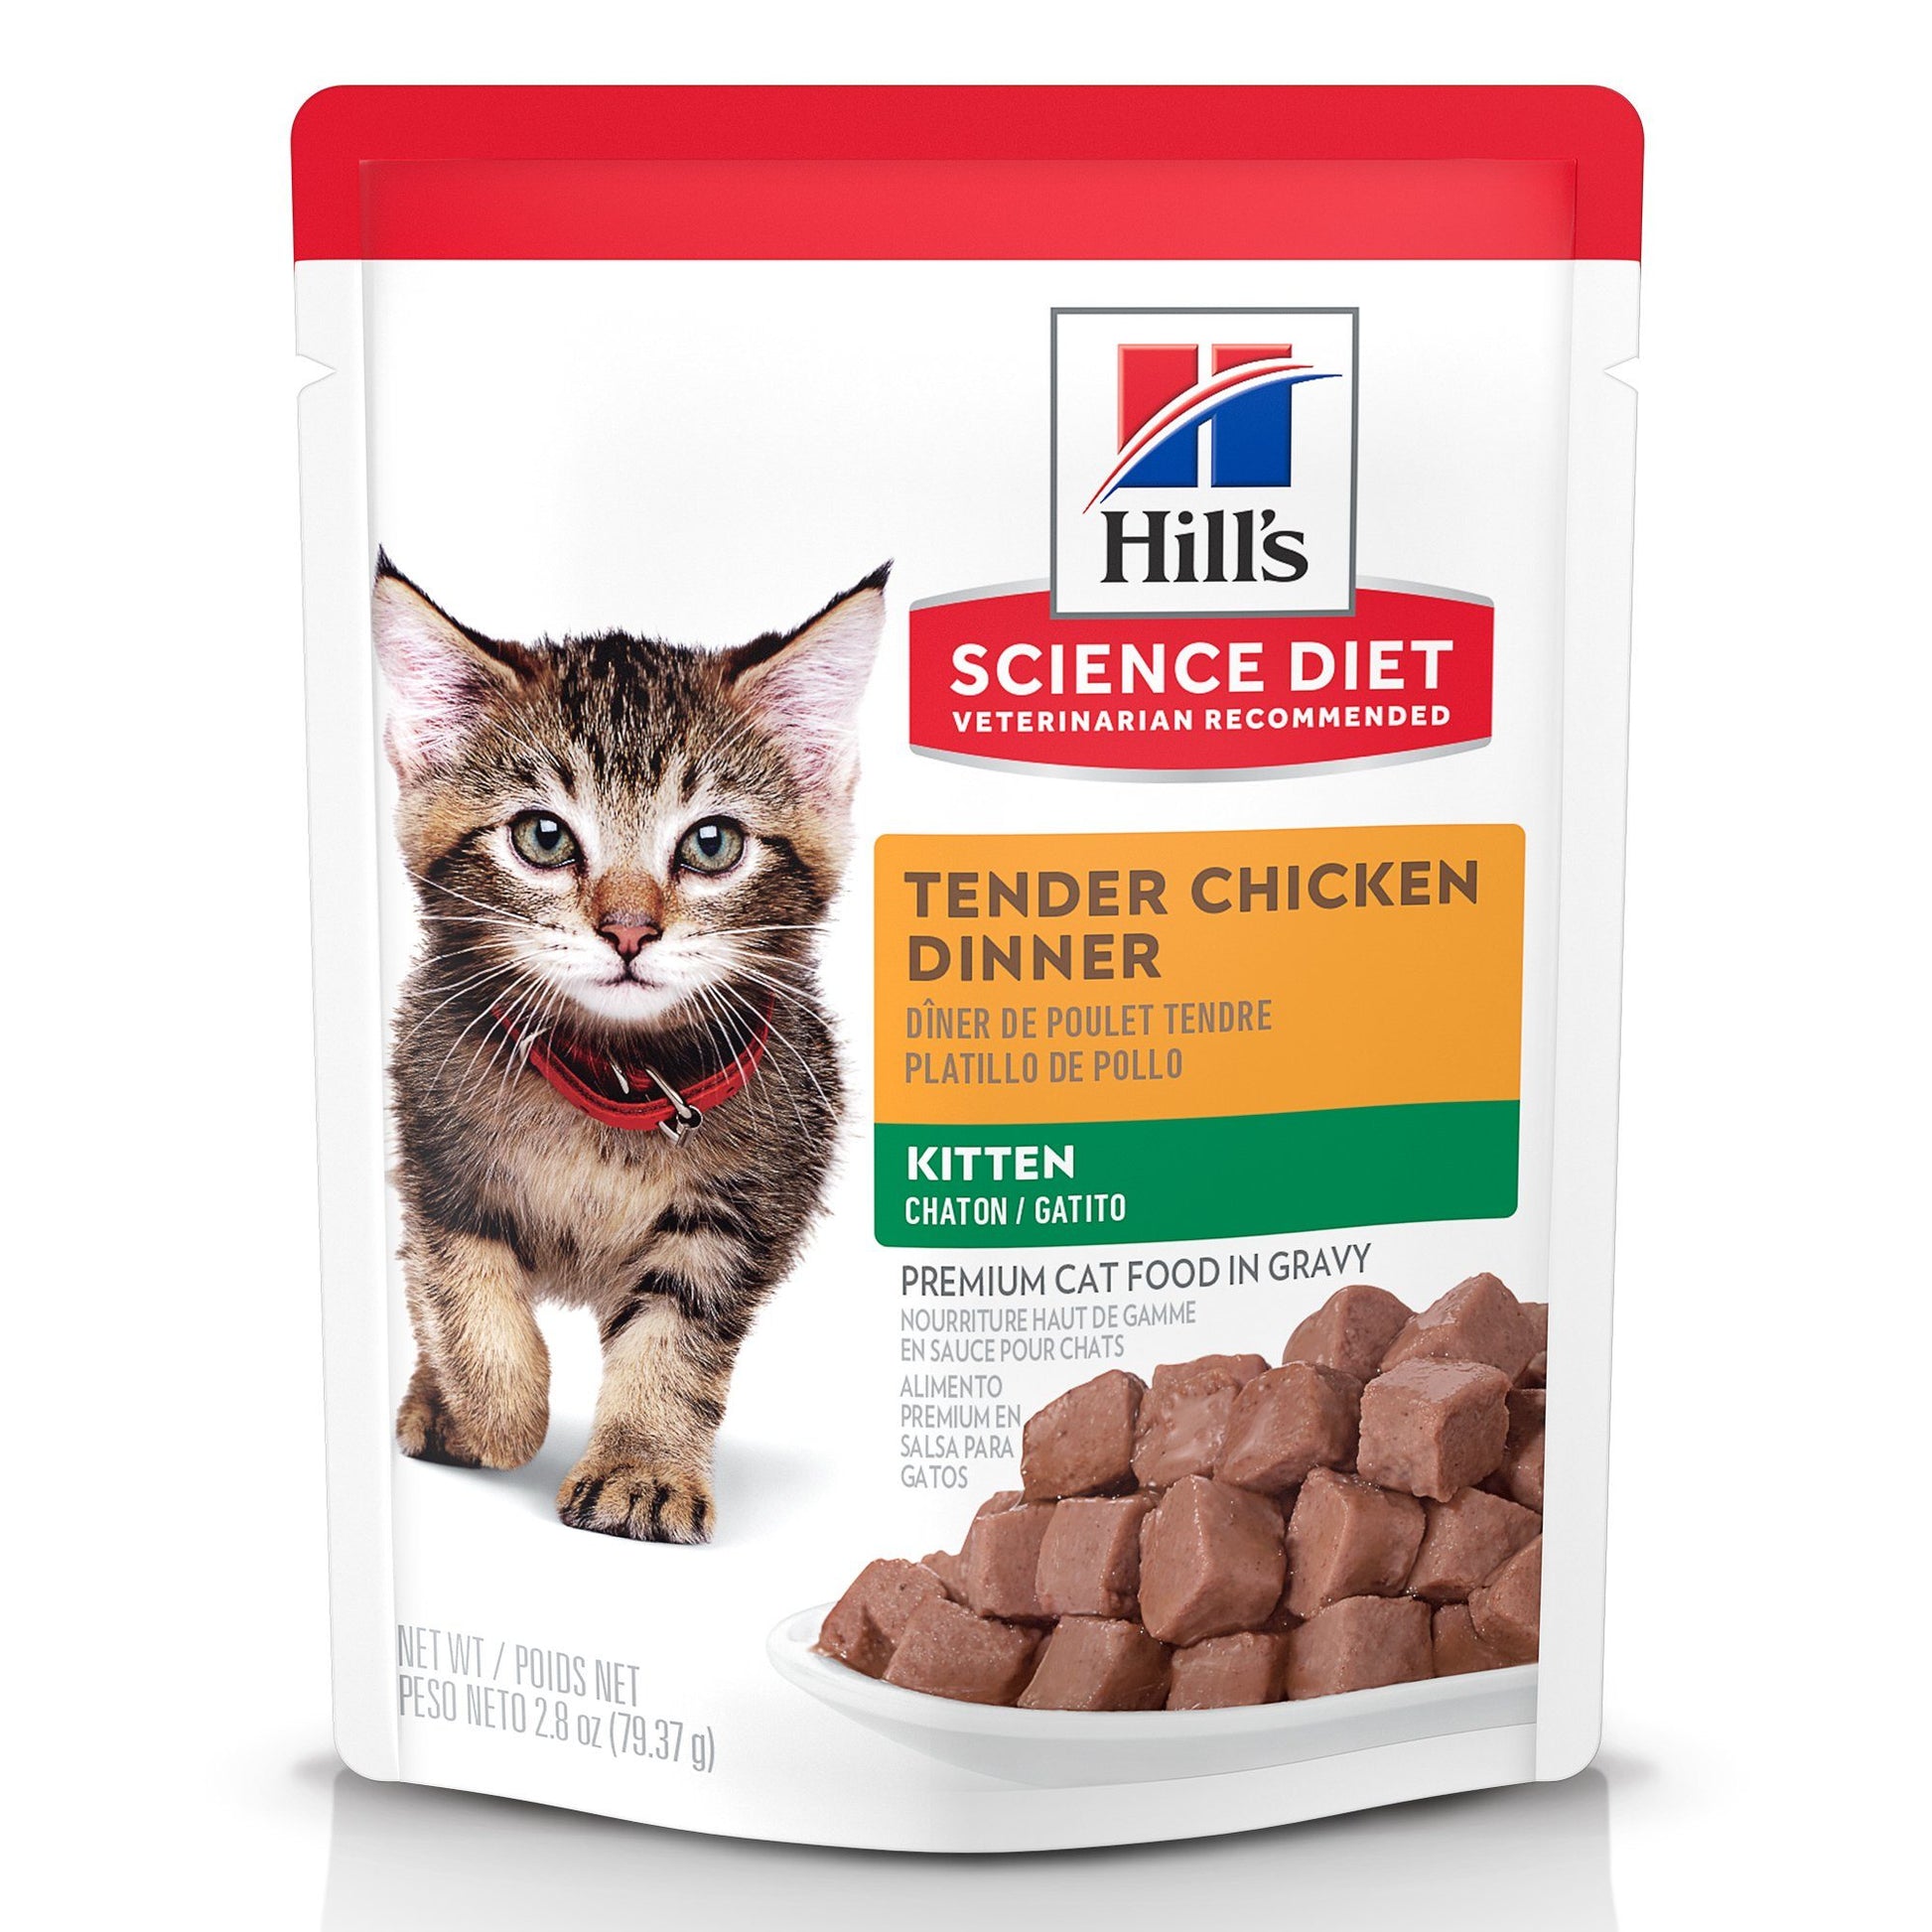 Hill's Science Diet Kitten Wet Cat Food, Chicken, 79g pouch 79g pouch Canned Cat Food 79g pouch | PetMax Canada